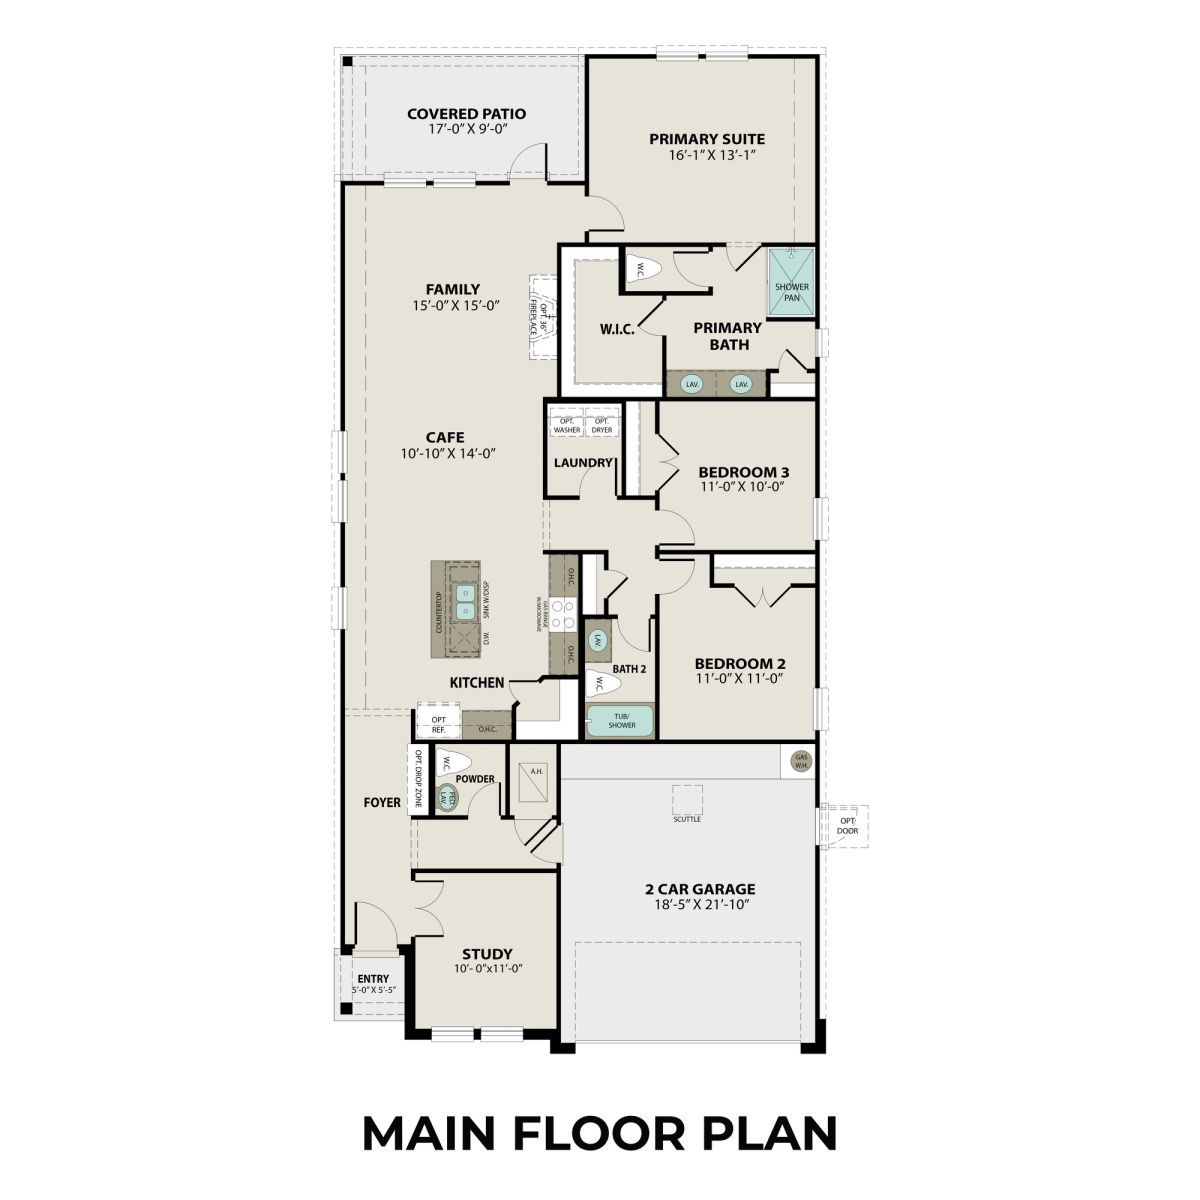 1 - The Riviera A buildable floor plan layout in Davidson Homes' Enclave at Newport community.